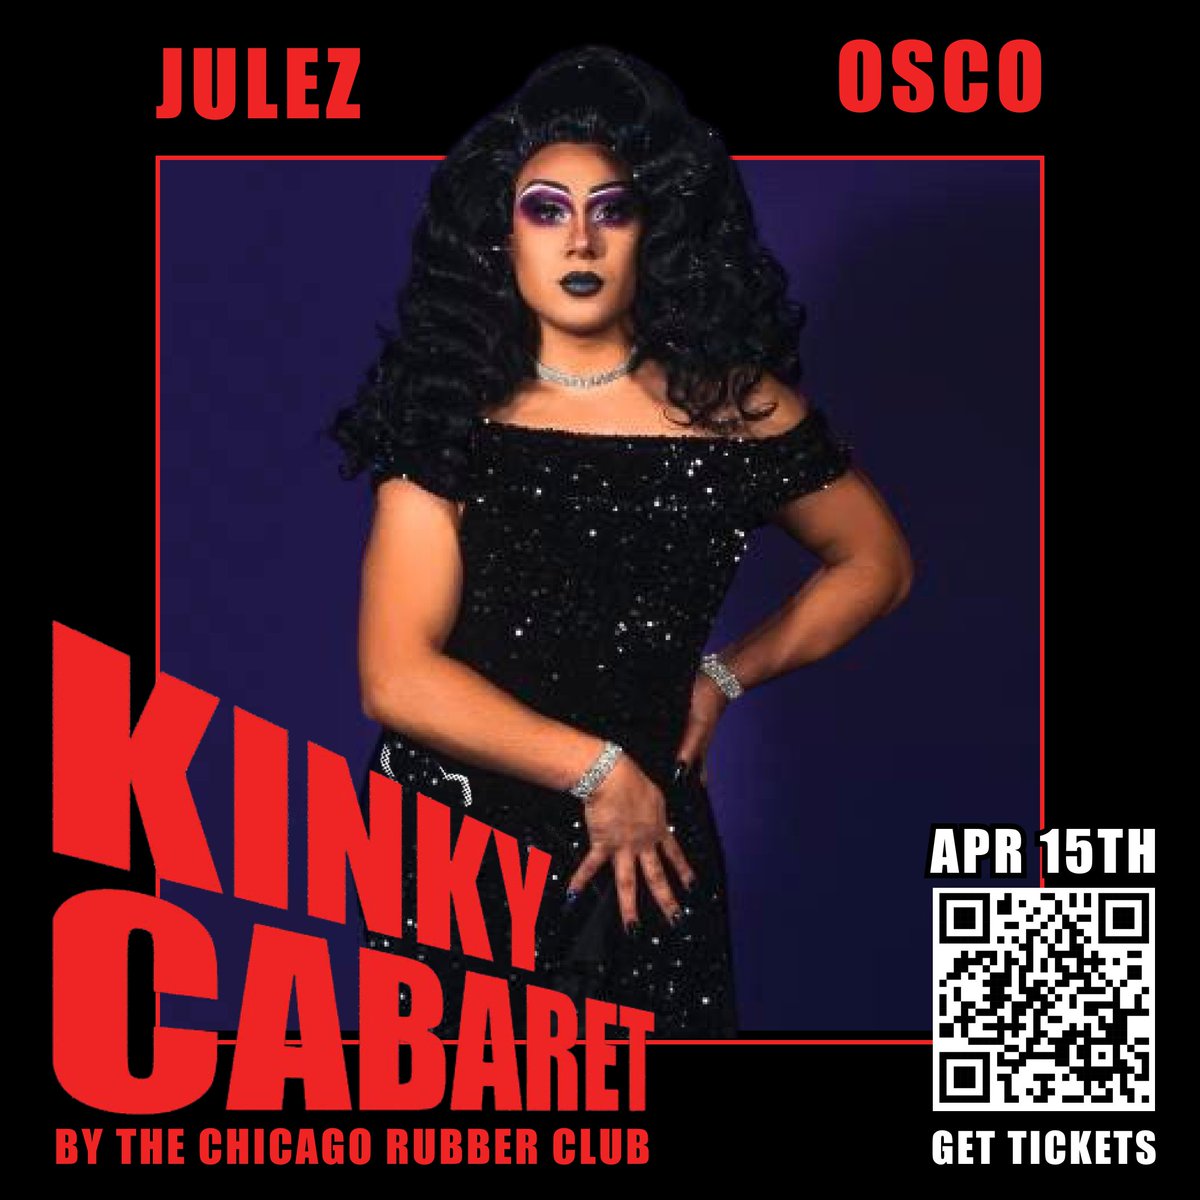 Come watch @julezosco twirl at the Baton Show Lounge! Get your tickets in advance before they sell out. crc-kinky-cabaret.eventbrite.com